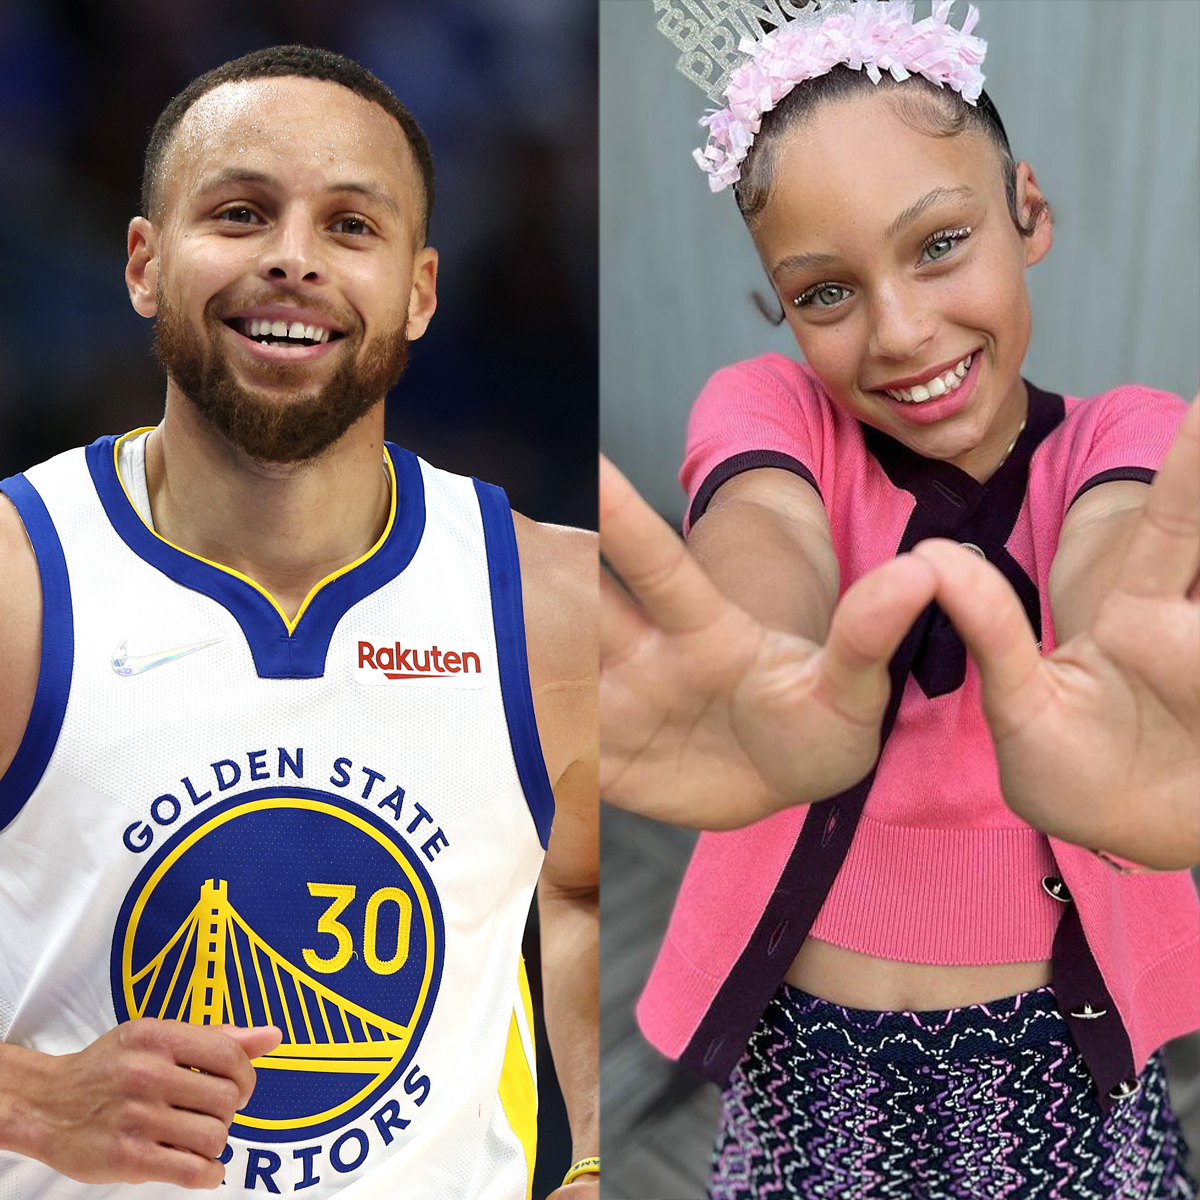 Stephen Curry's Daughter Looks All Grown Up at Basketball Game: Photo